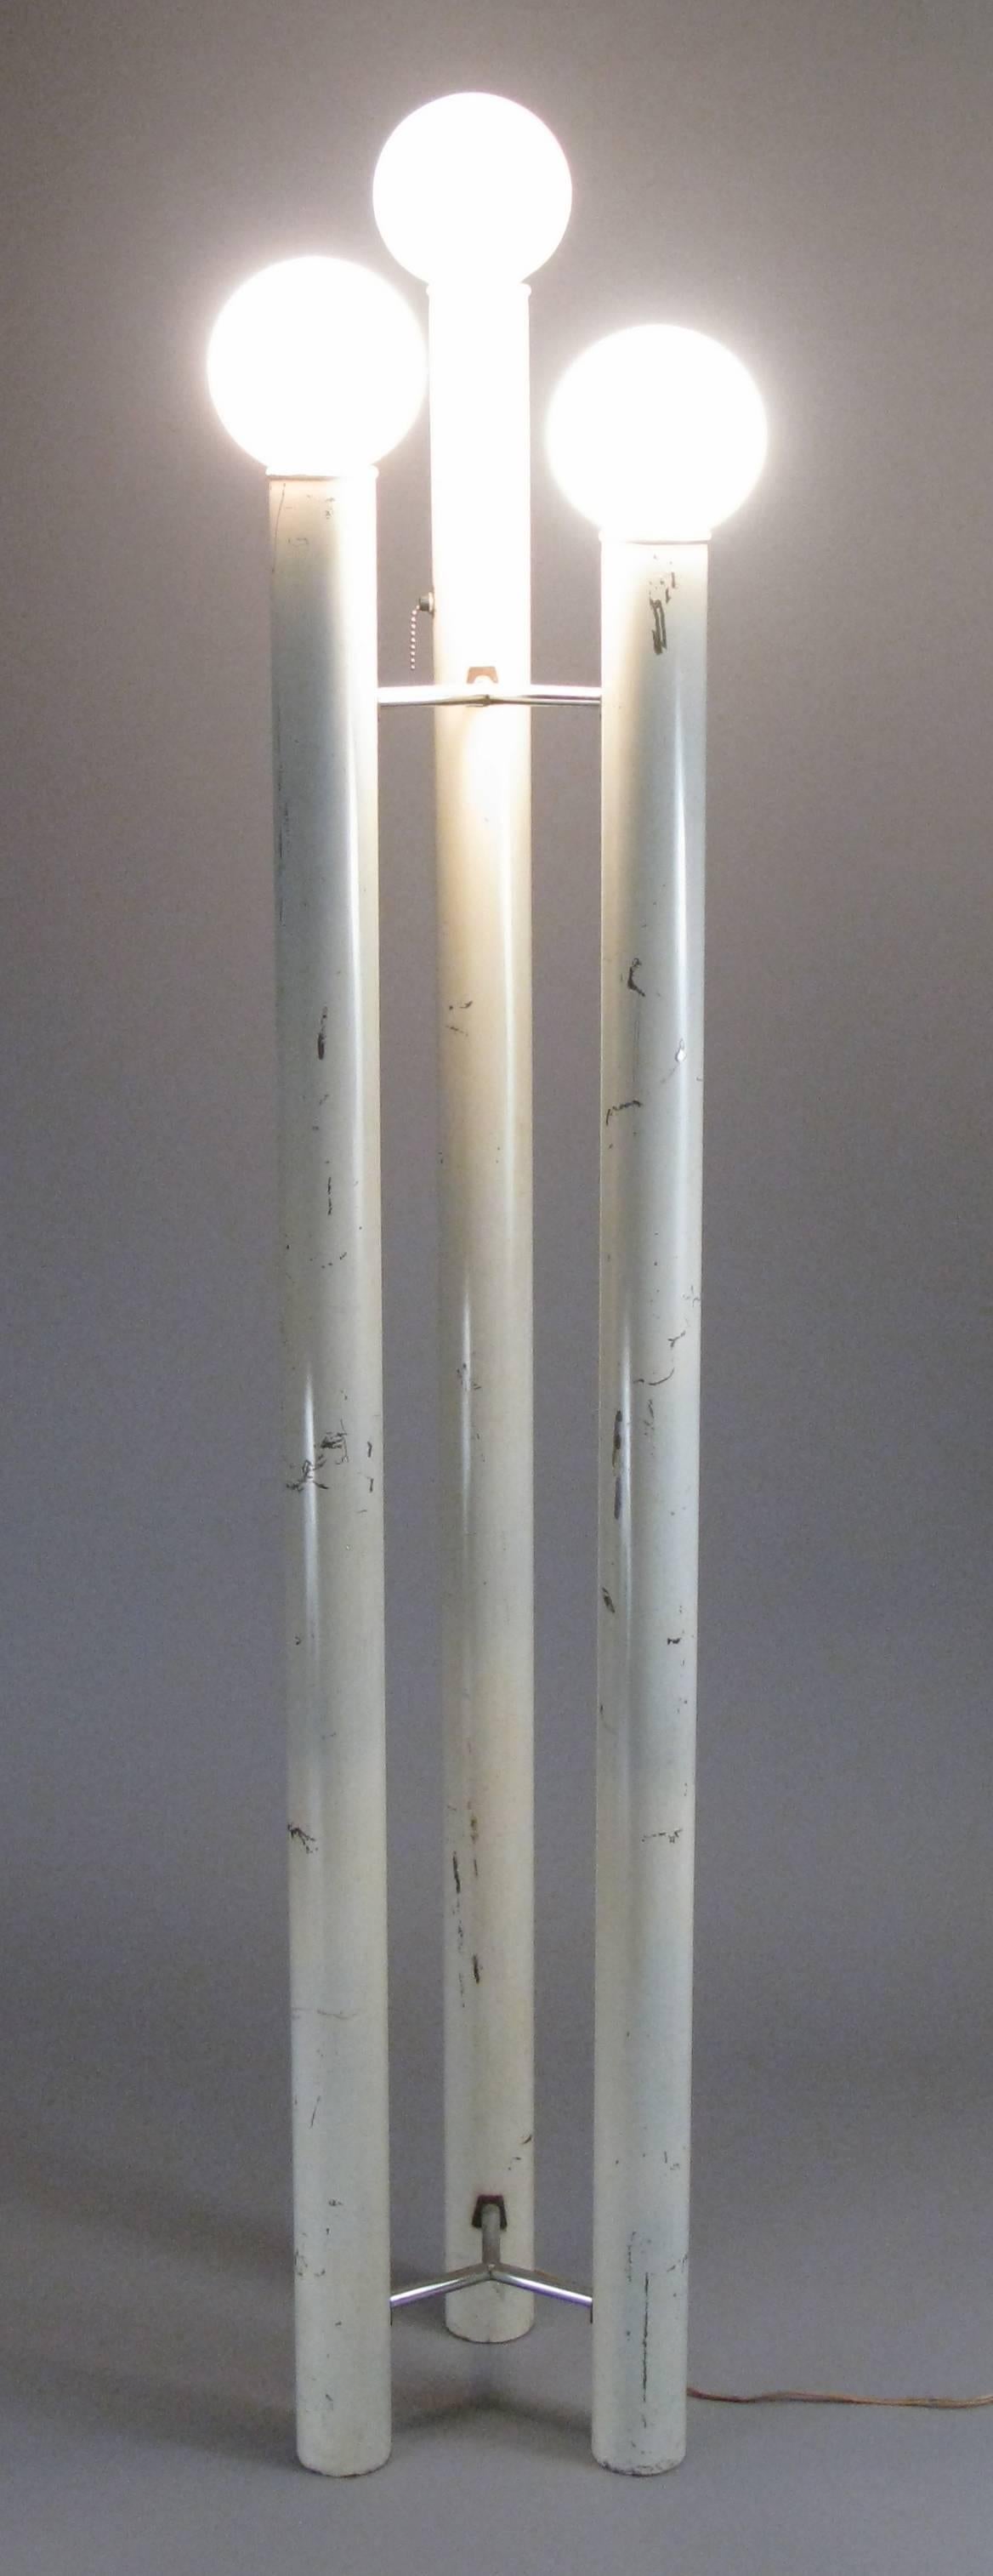 A 1970s three tower floor lamp designed by Tony Paul for Mutual Sunset, from his Bellini collection. in as found condition with scrapes to the painted finish. 